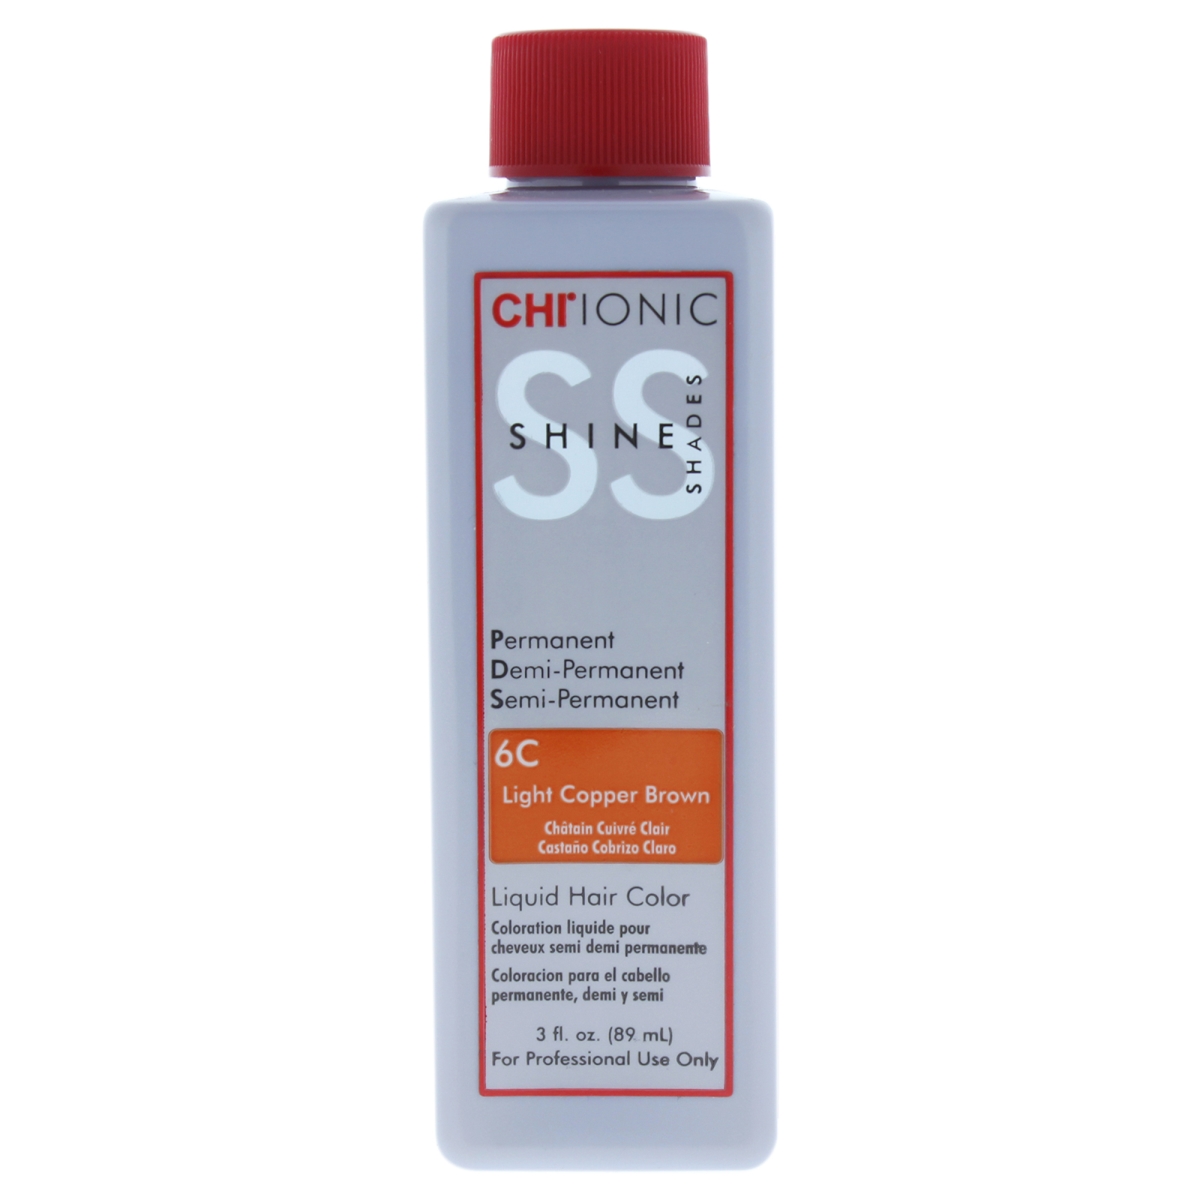 I0084031 Ionic Shine Shades Liquid Hair Color For Unisex - 6c Light Copper Brown - 3 Oz